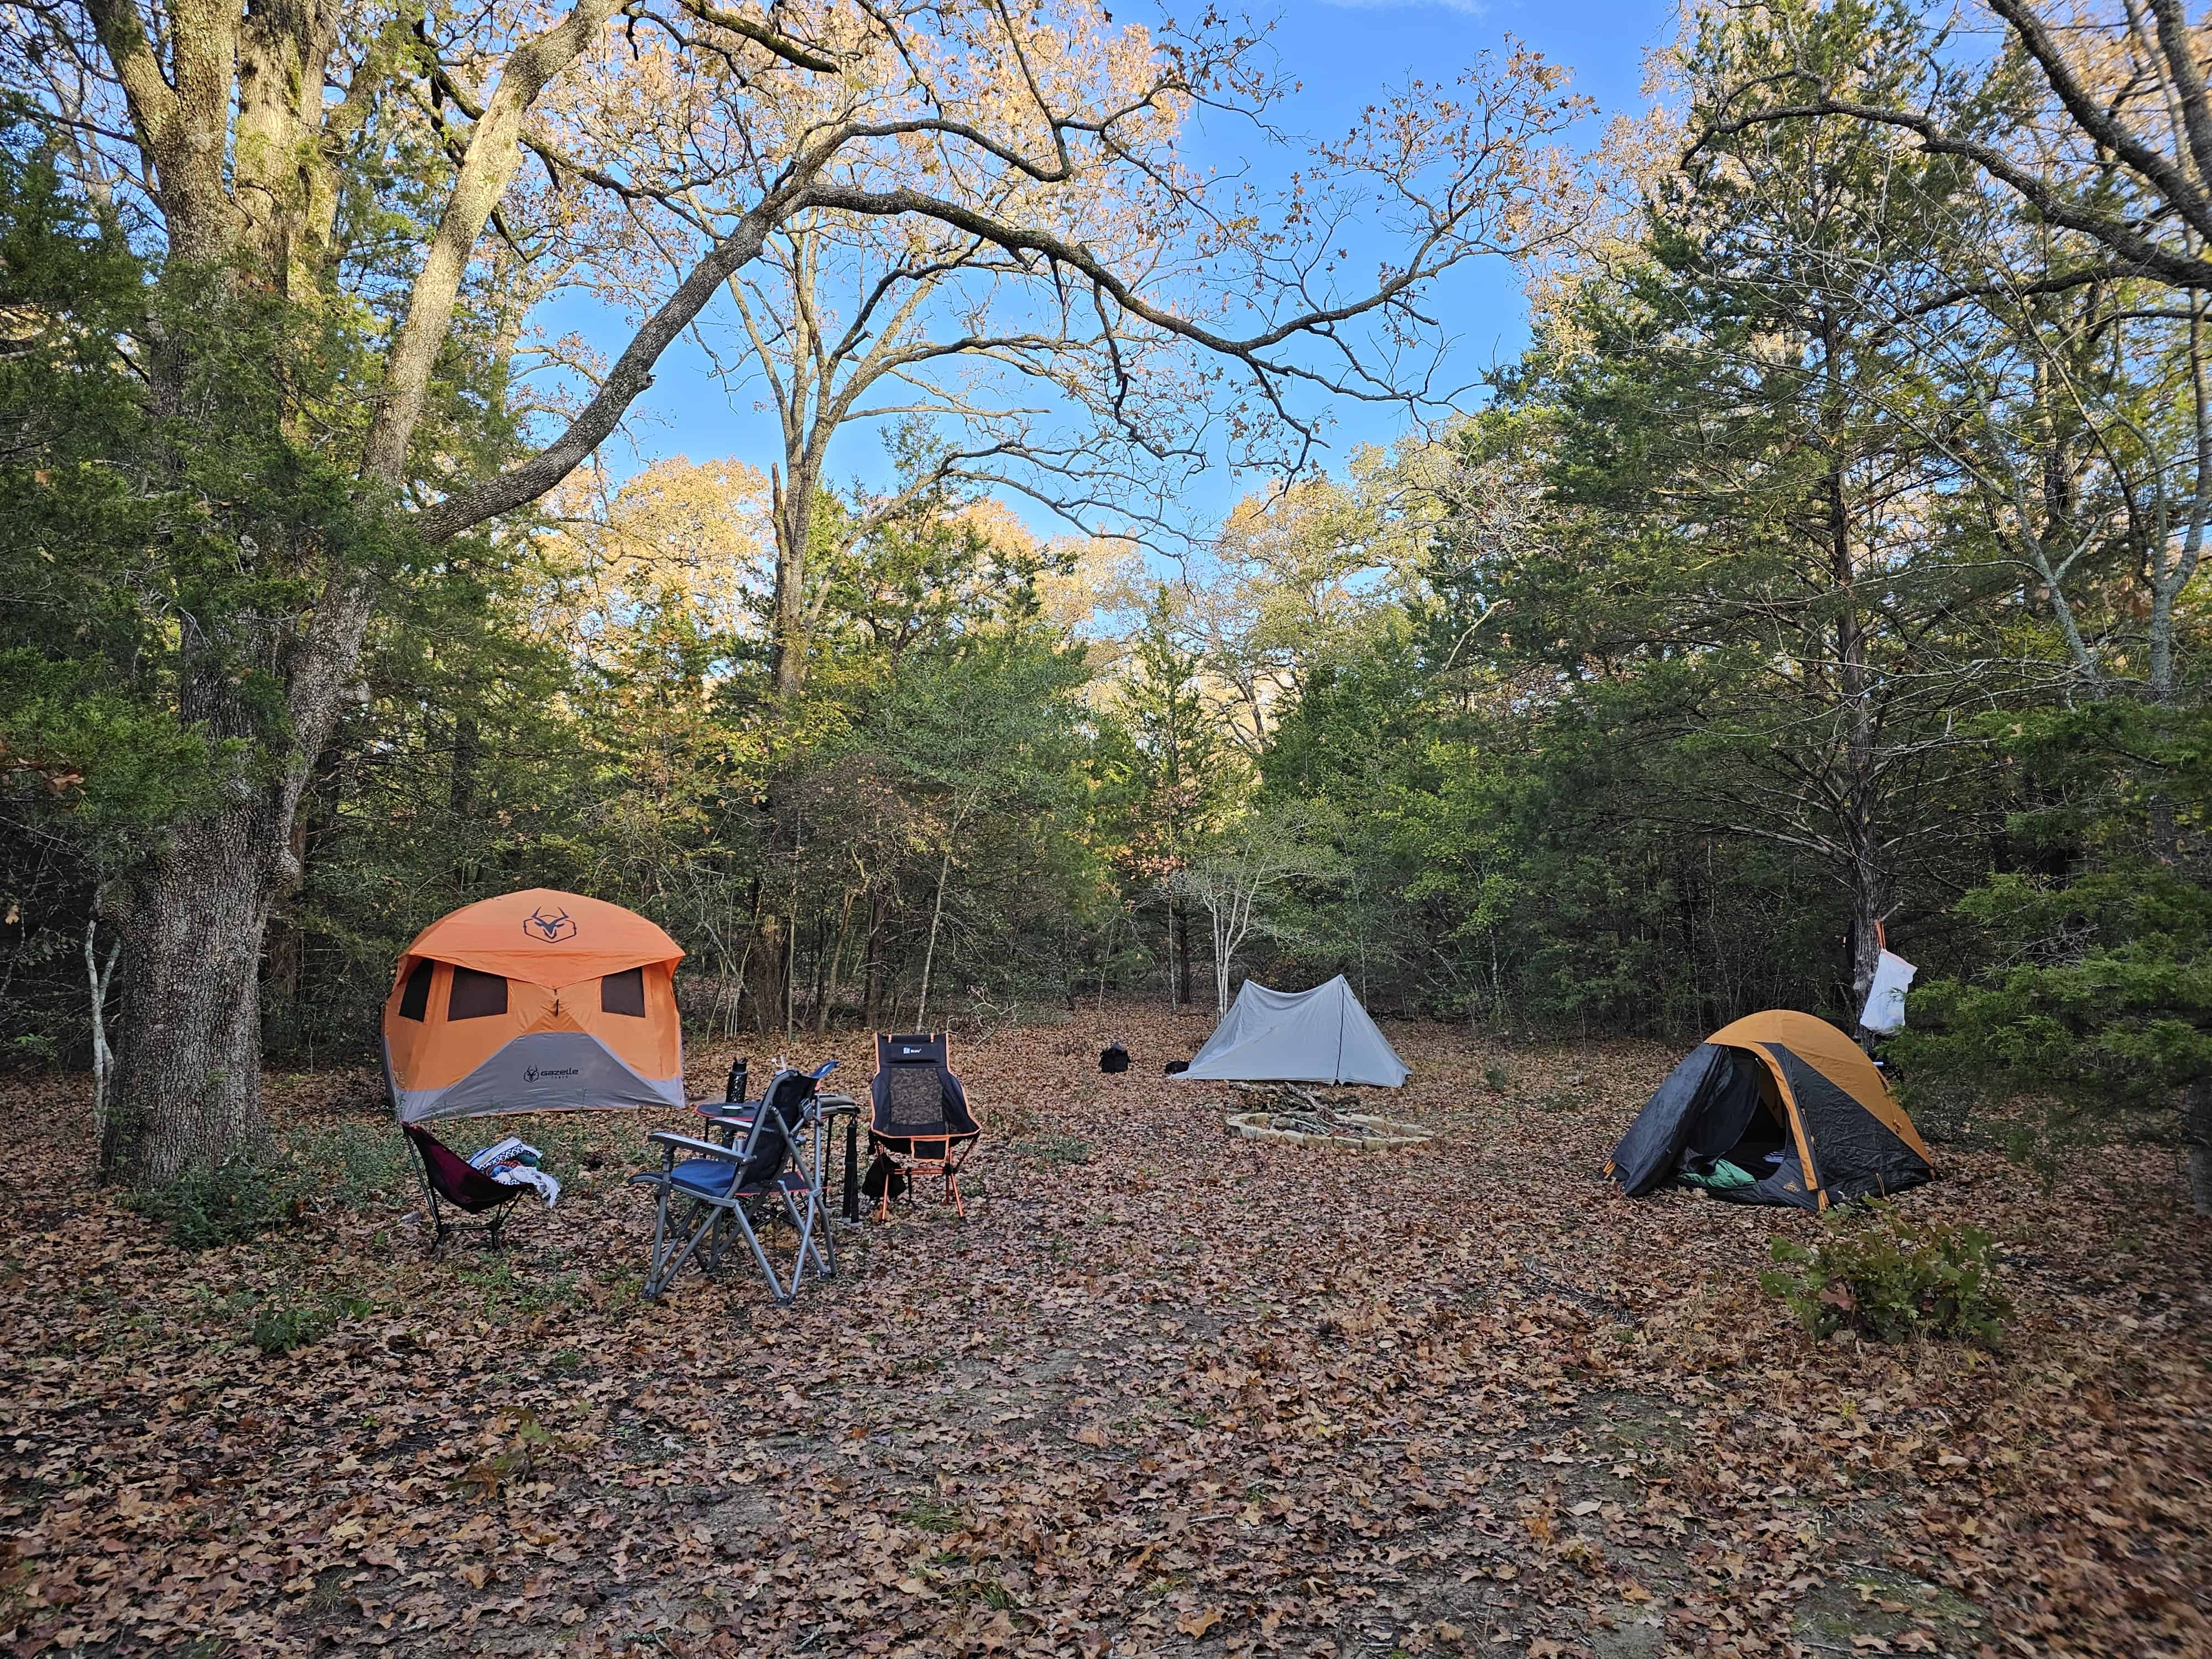 photograph of a collection of tents at a primitive campsite